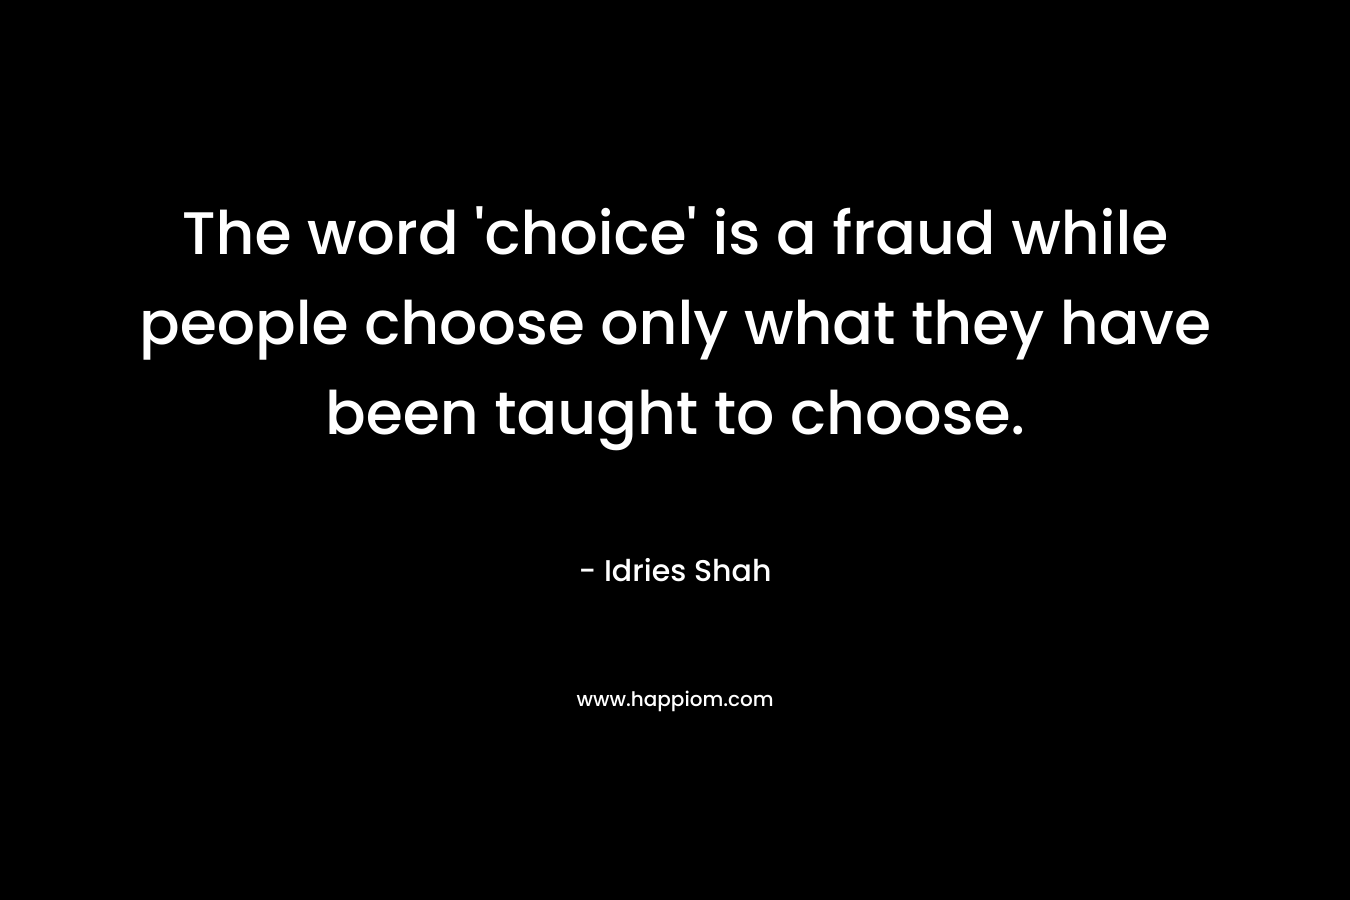 The word 'choice' is a fraud while people choose only what they have been taught to choose.